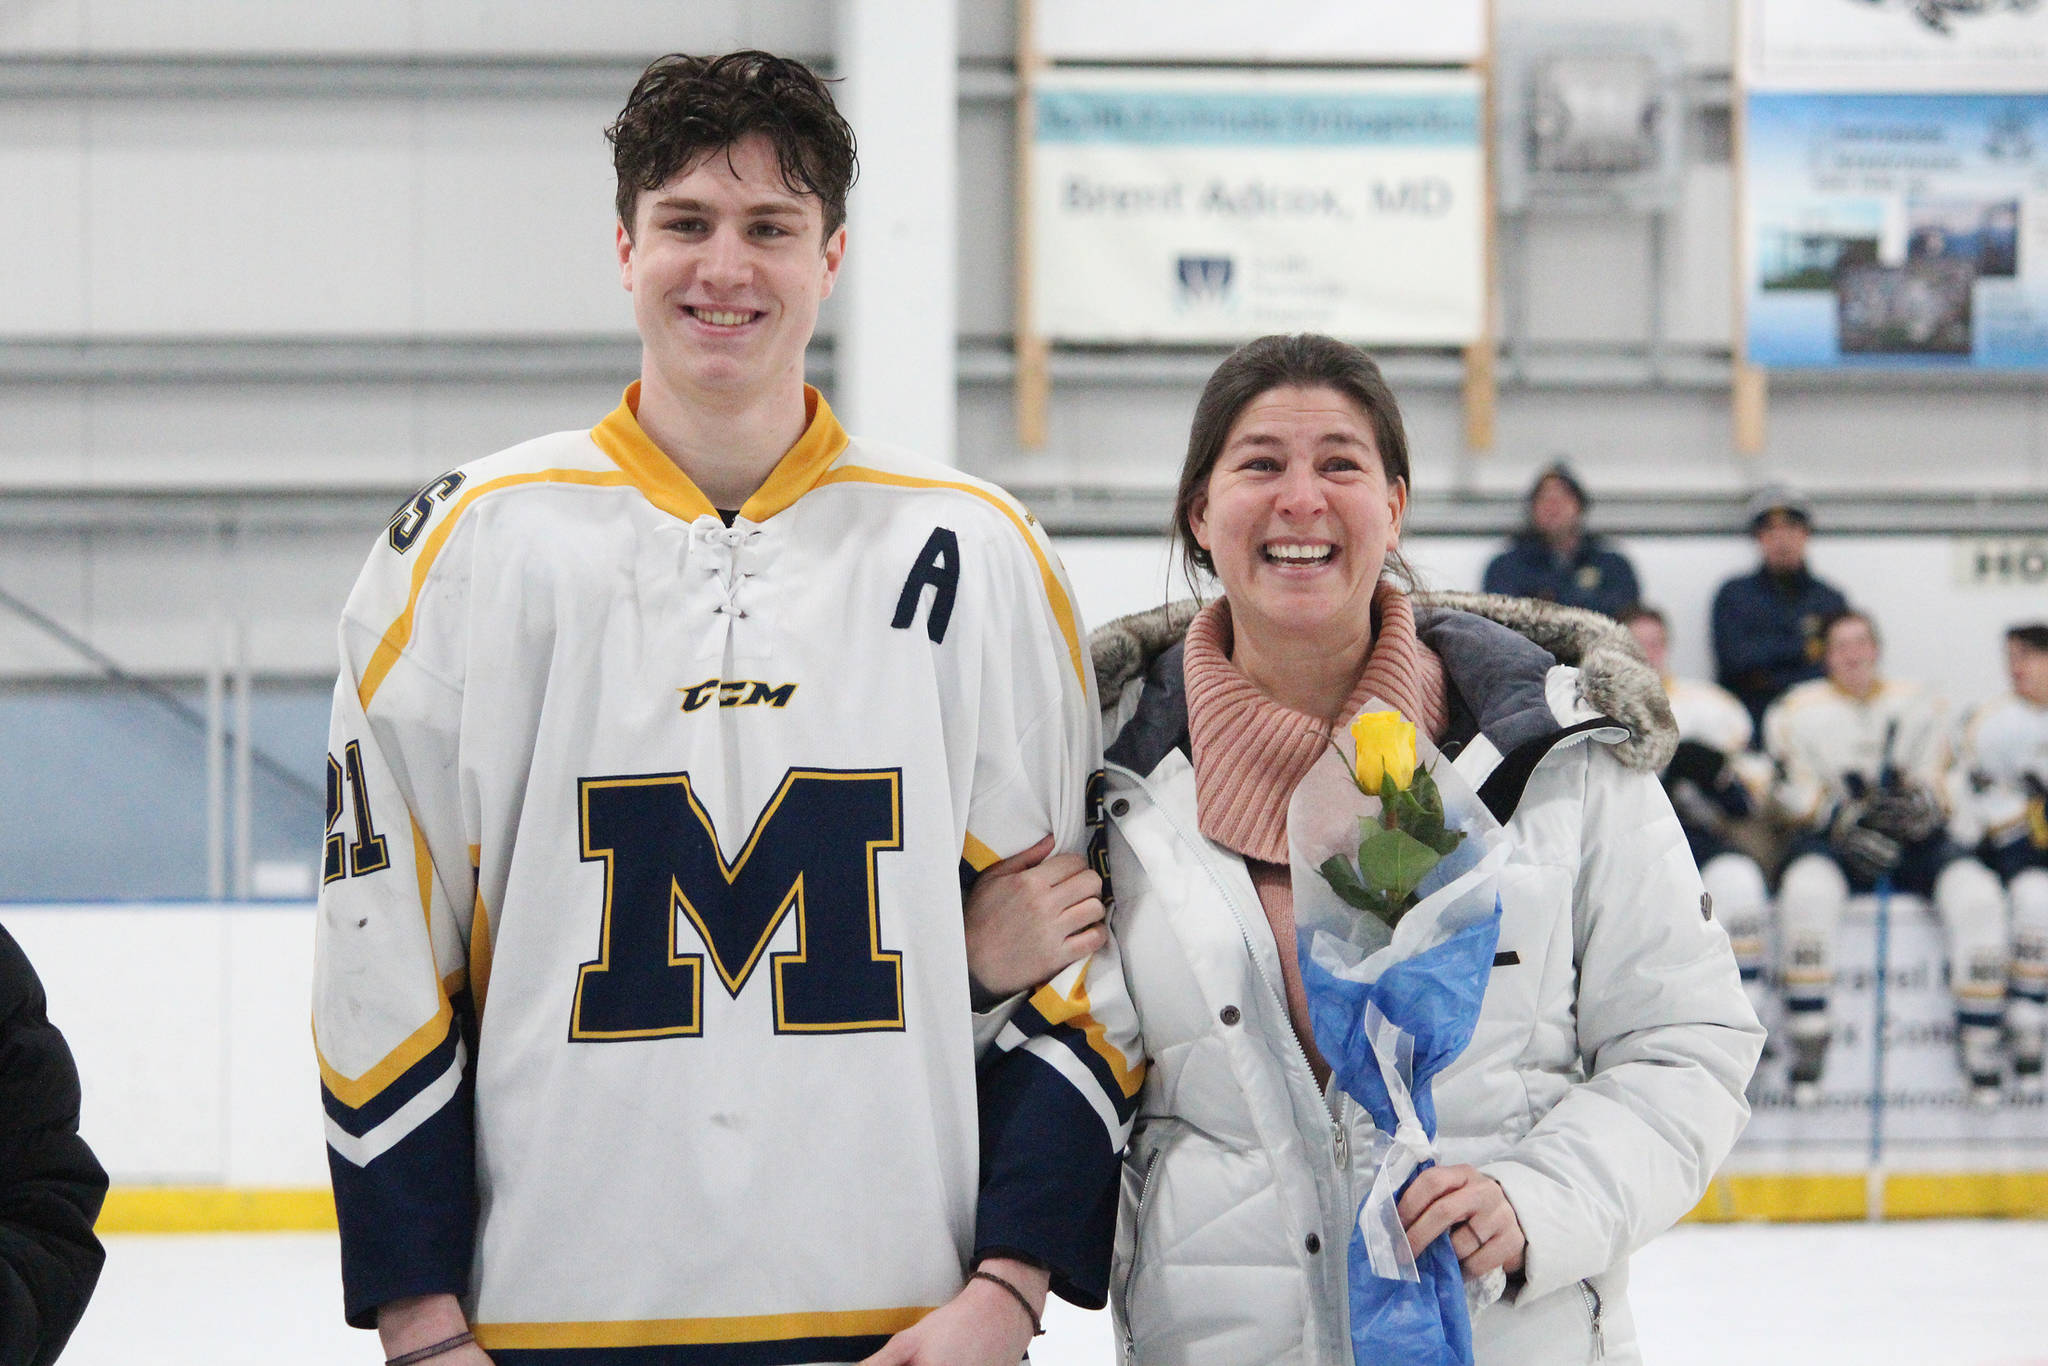 Homer senior Tucker Weston is honored with his mother on Senior Night for the Homer High School hockey team Thursday, Jan. 24, 2019 at Kevin Bell Ice Arena in Homer, Alaska. The Mariners defeated Houston High School 10-1. (Photo by Megan Pacer/Homer News)